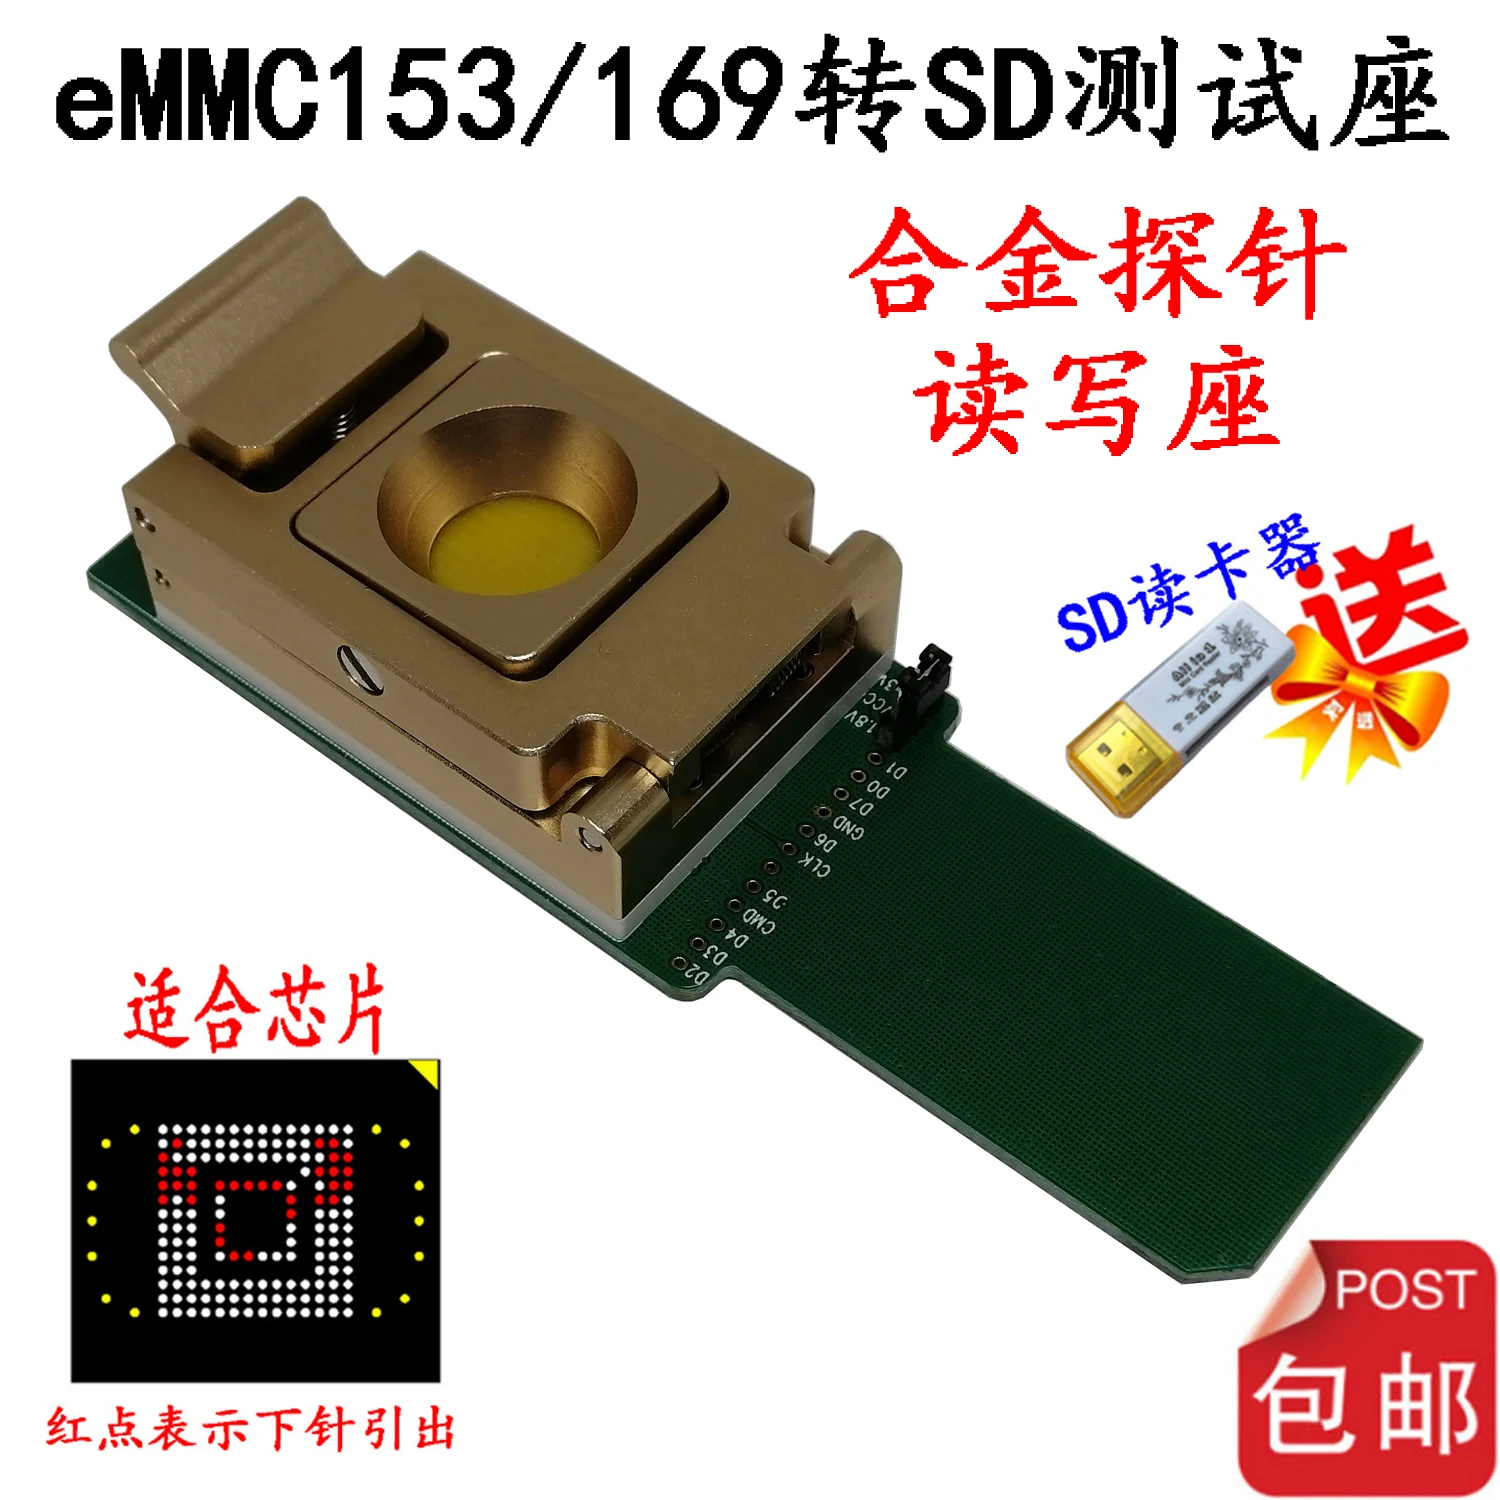 

Emmc153-169 to SD Test Base Alloy Probe Burning Base Font Library Data Recovery Tool